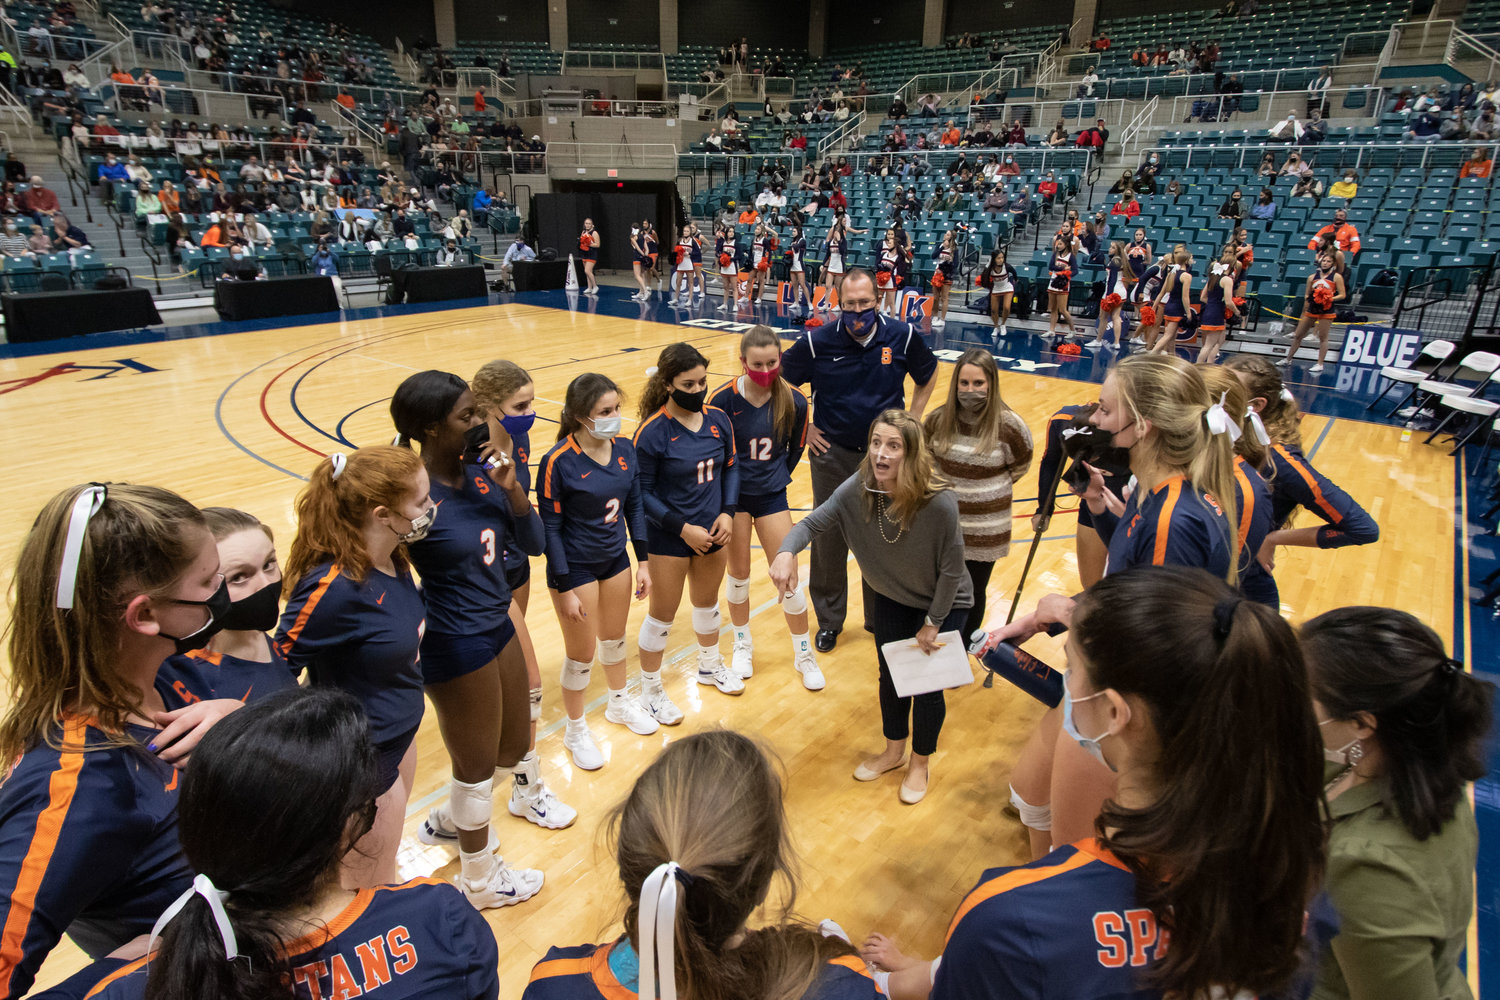 Seven Lakes coach Amy Cataline talks to her team during the team's Class 6A state semifinal match against San Antonio Reagan on Dec. 7 at the Merrell Center.